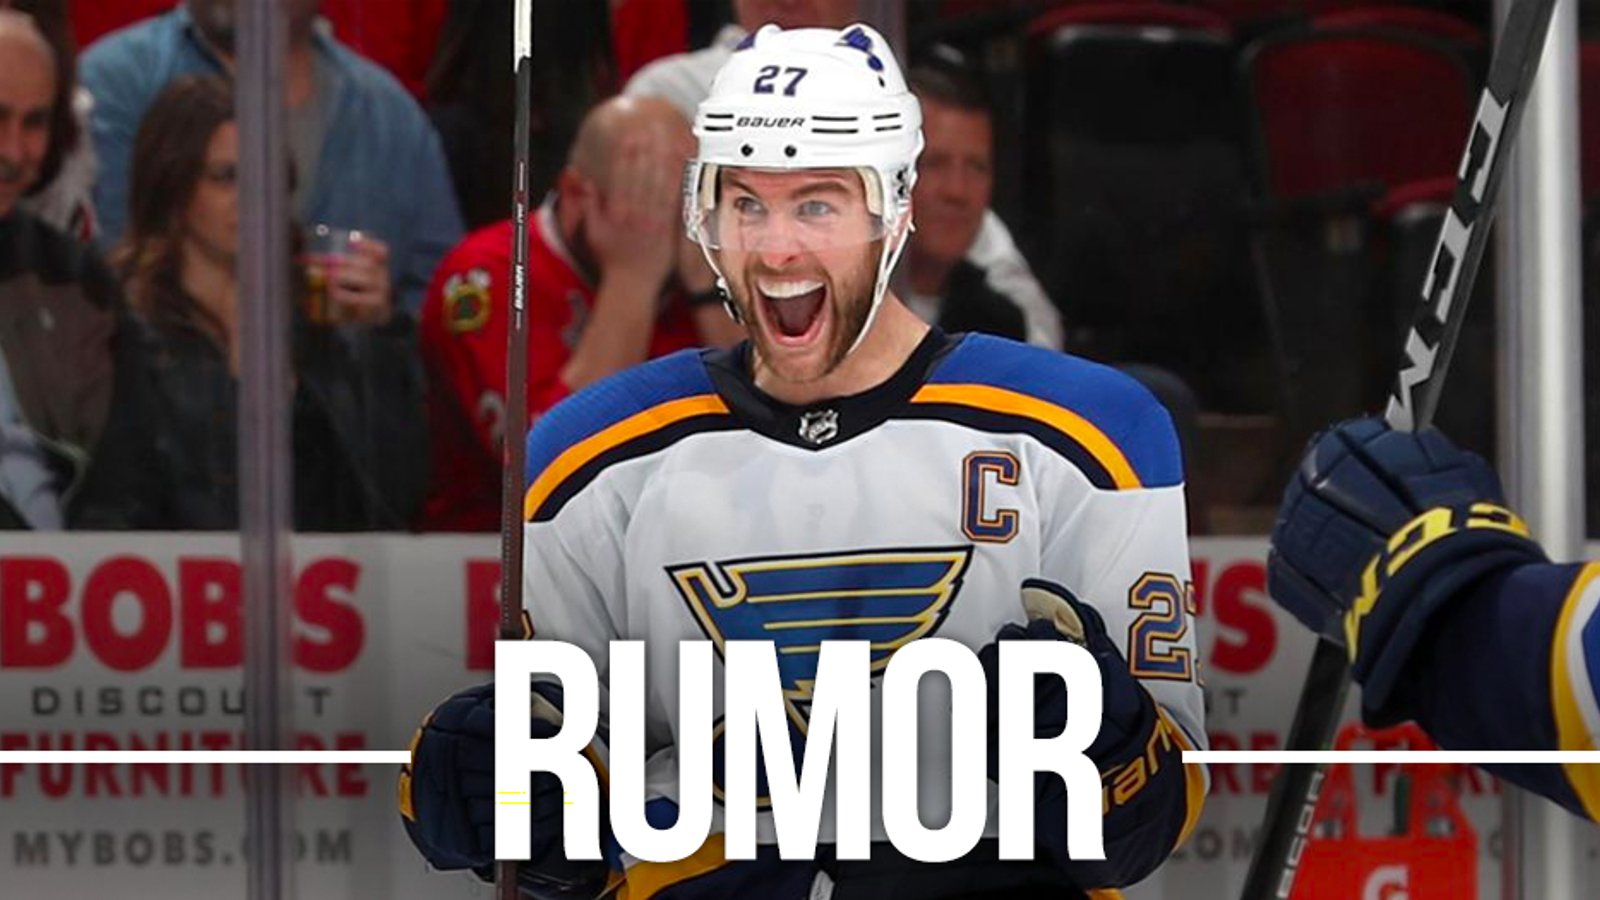 Report: Pietrangelo calls out Blues for “disappointing” negotiations